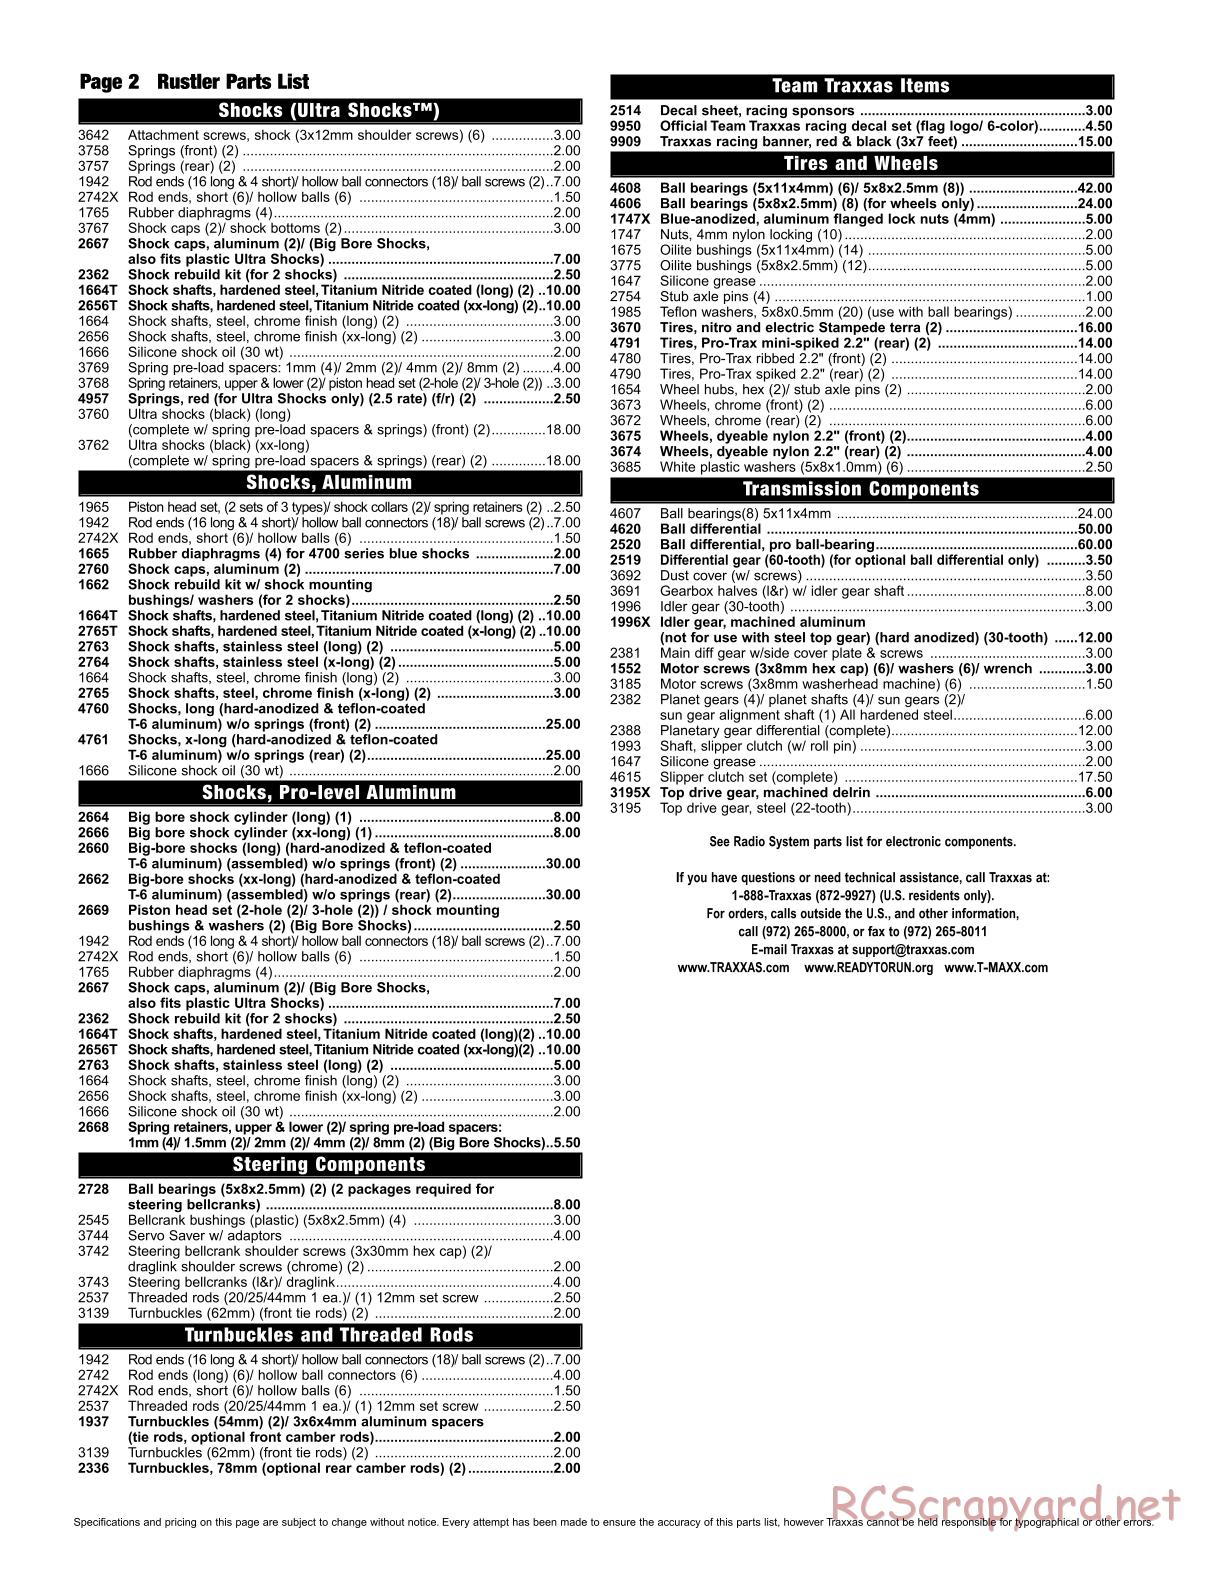 Traxxas - Rustler - Parts List - Page 2